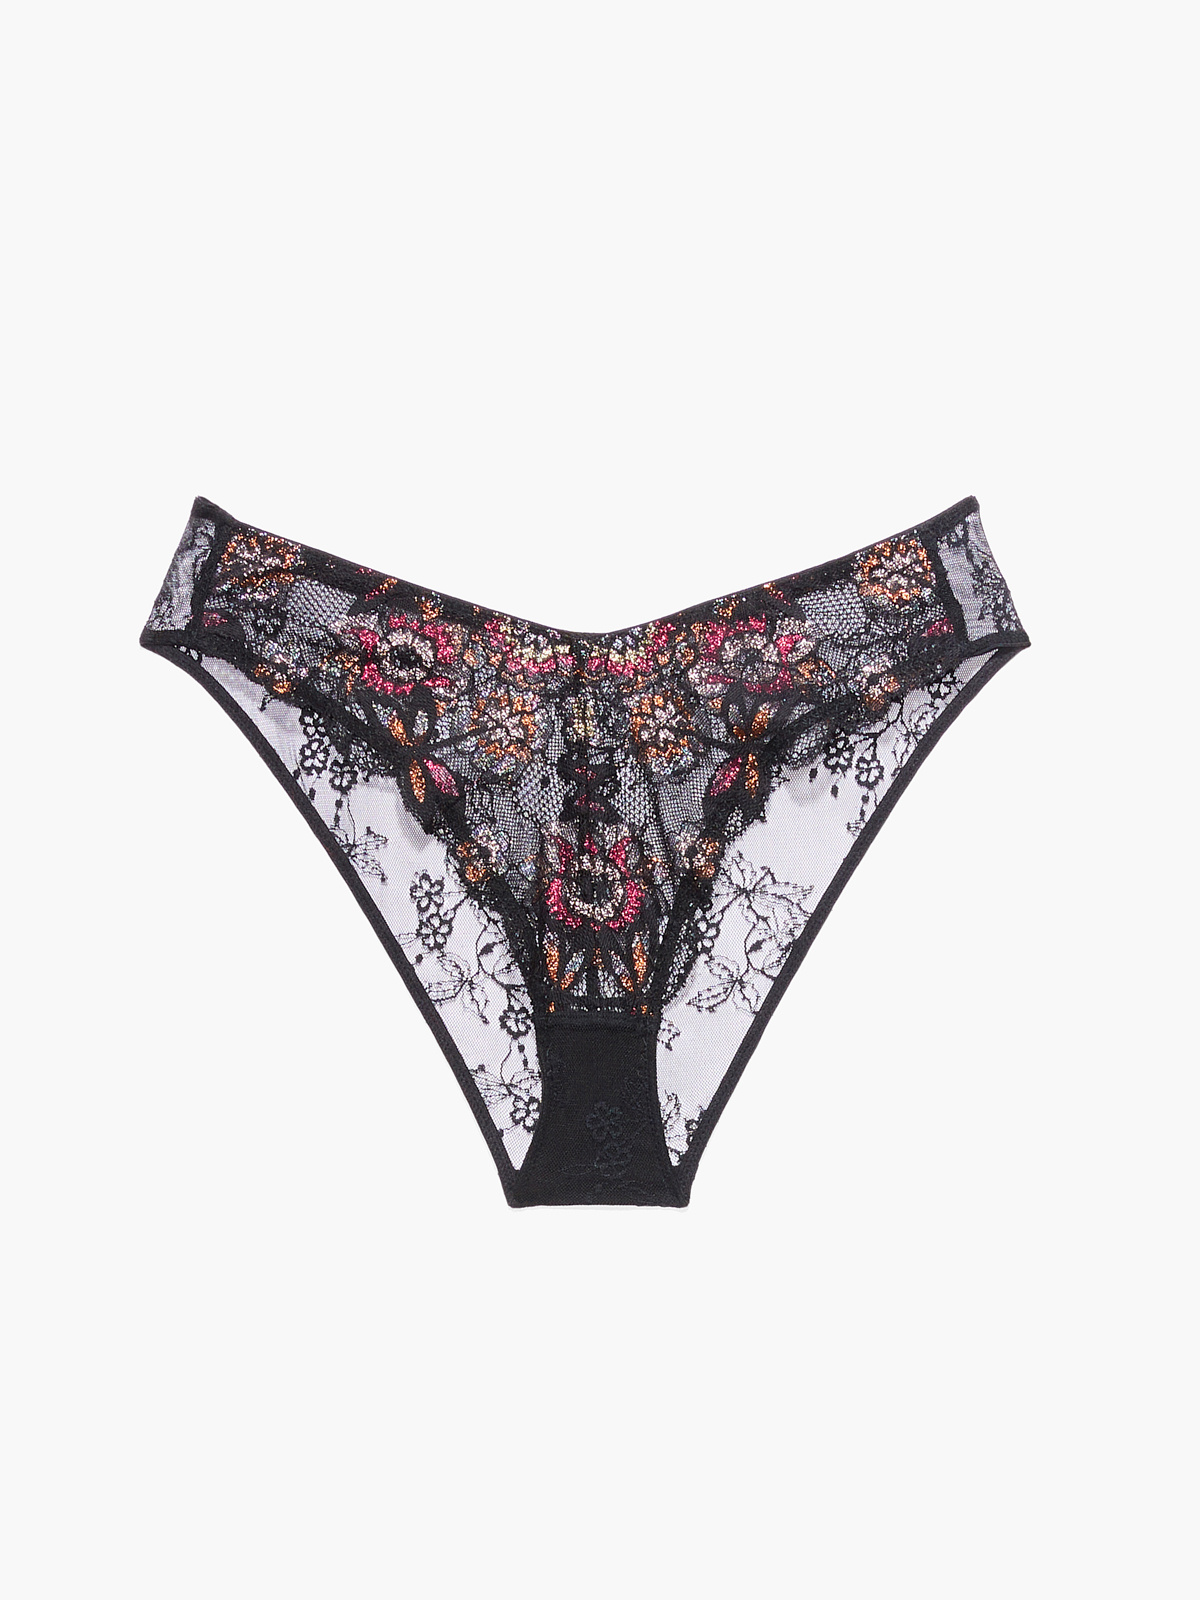 https://cdn.savagex.com/media/images/products/UD2253525-5298/NYMPH-NOUVEAU-LACE-CHEEKY-PANTY-UD2253525-5298-LAYDOWN-1200x1600.jpg